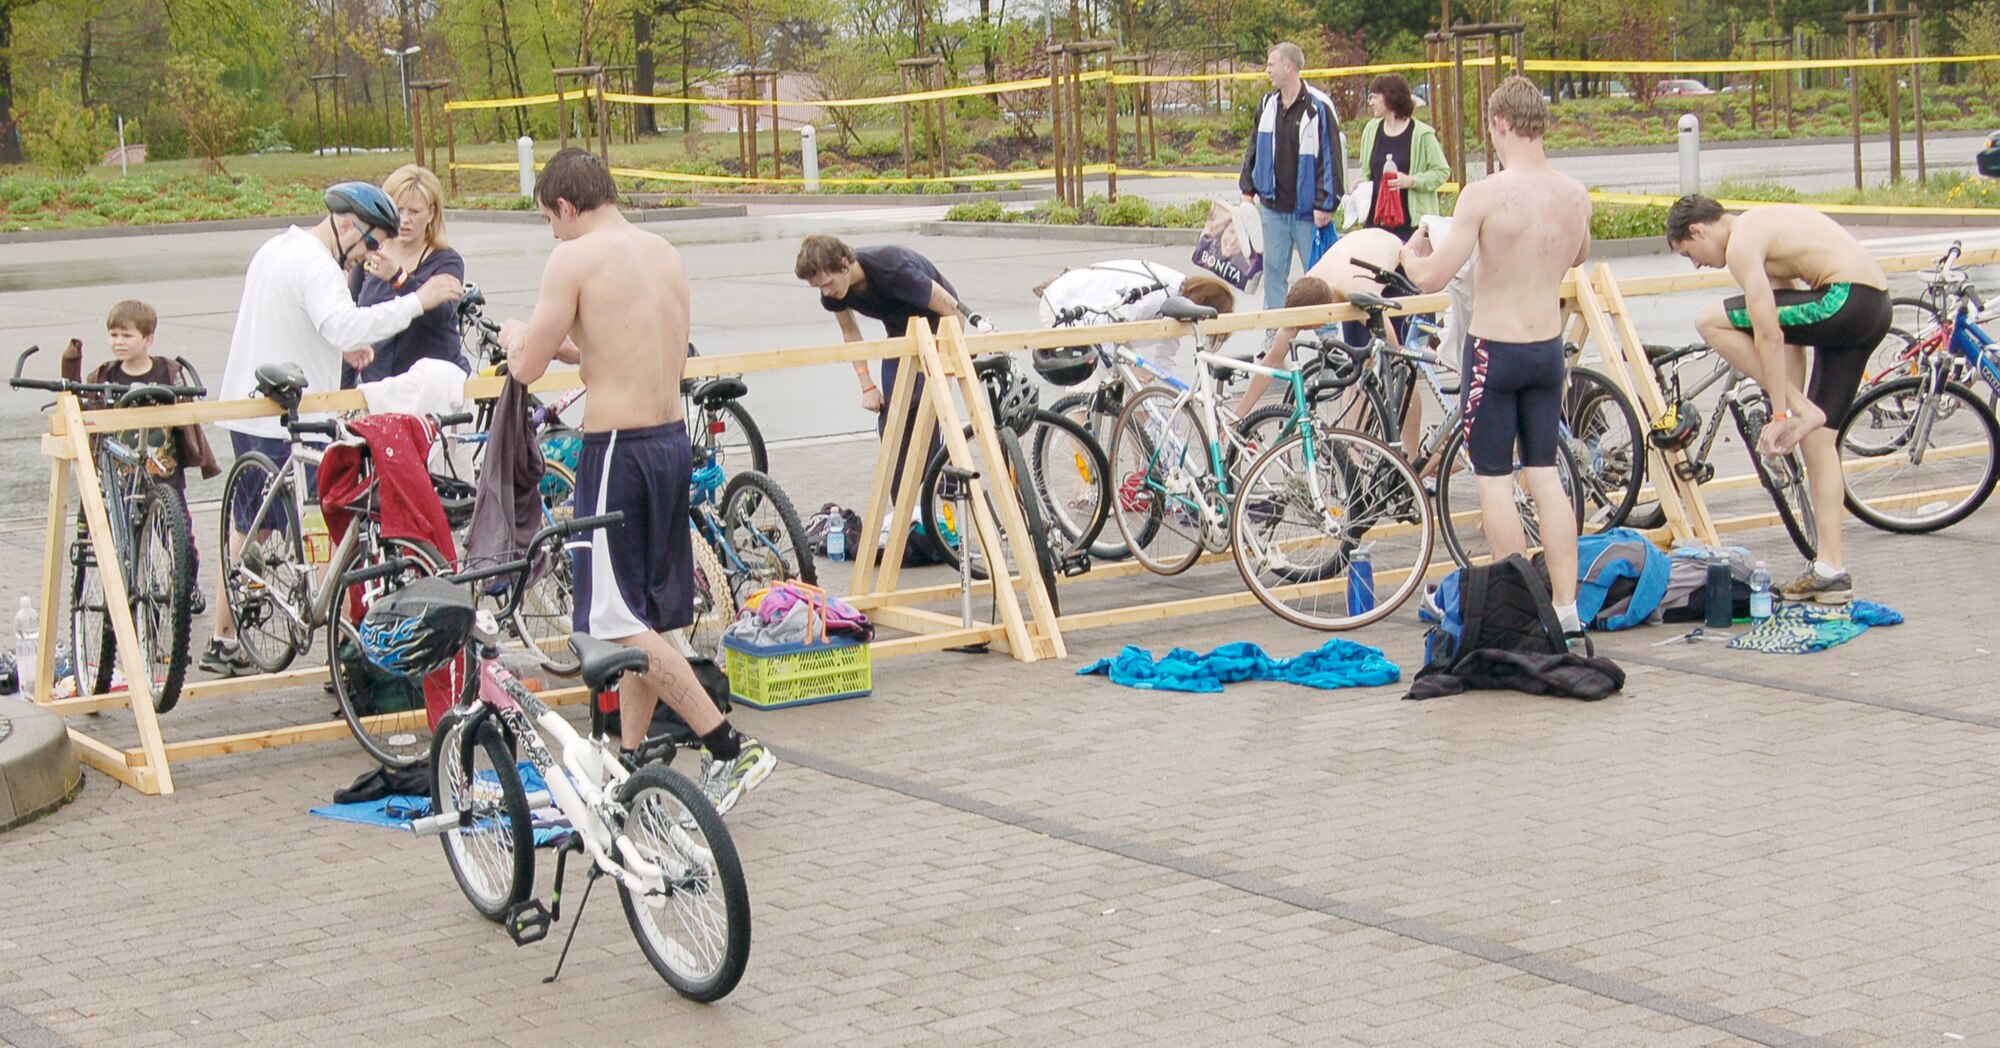 Youth transition from the swimming to the biking portion of the second annual FitFactor Triathlon May 2, 2010, at Ramstein Air Base, Germany. Participants biked either three or 11 miles, depending on their age category. (U.S. Air Force photo by Senior Airman Amanda Dick)